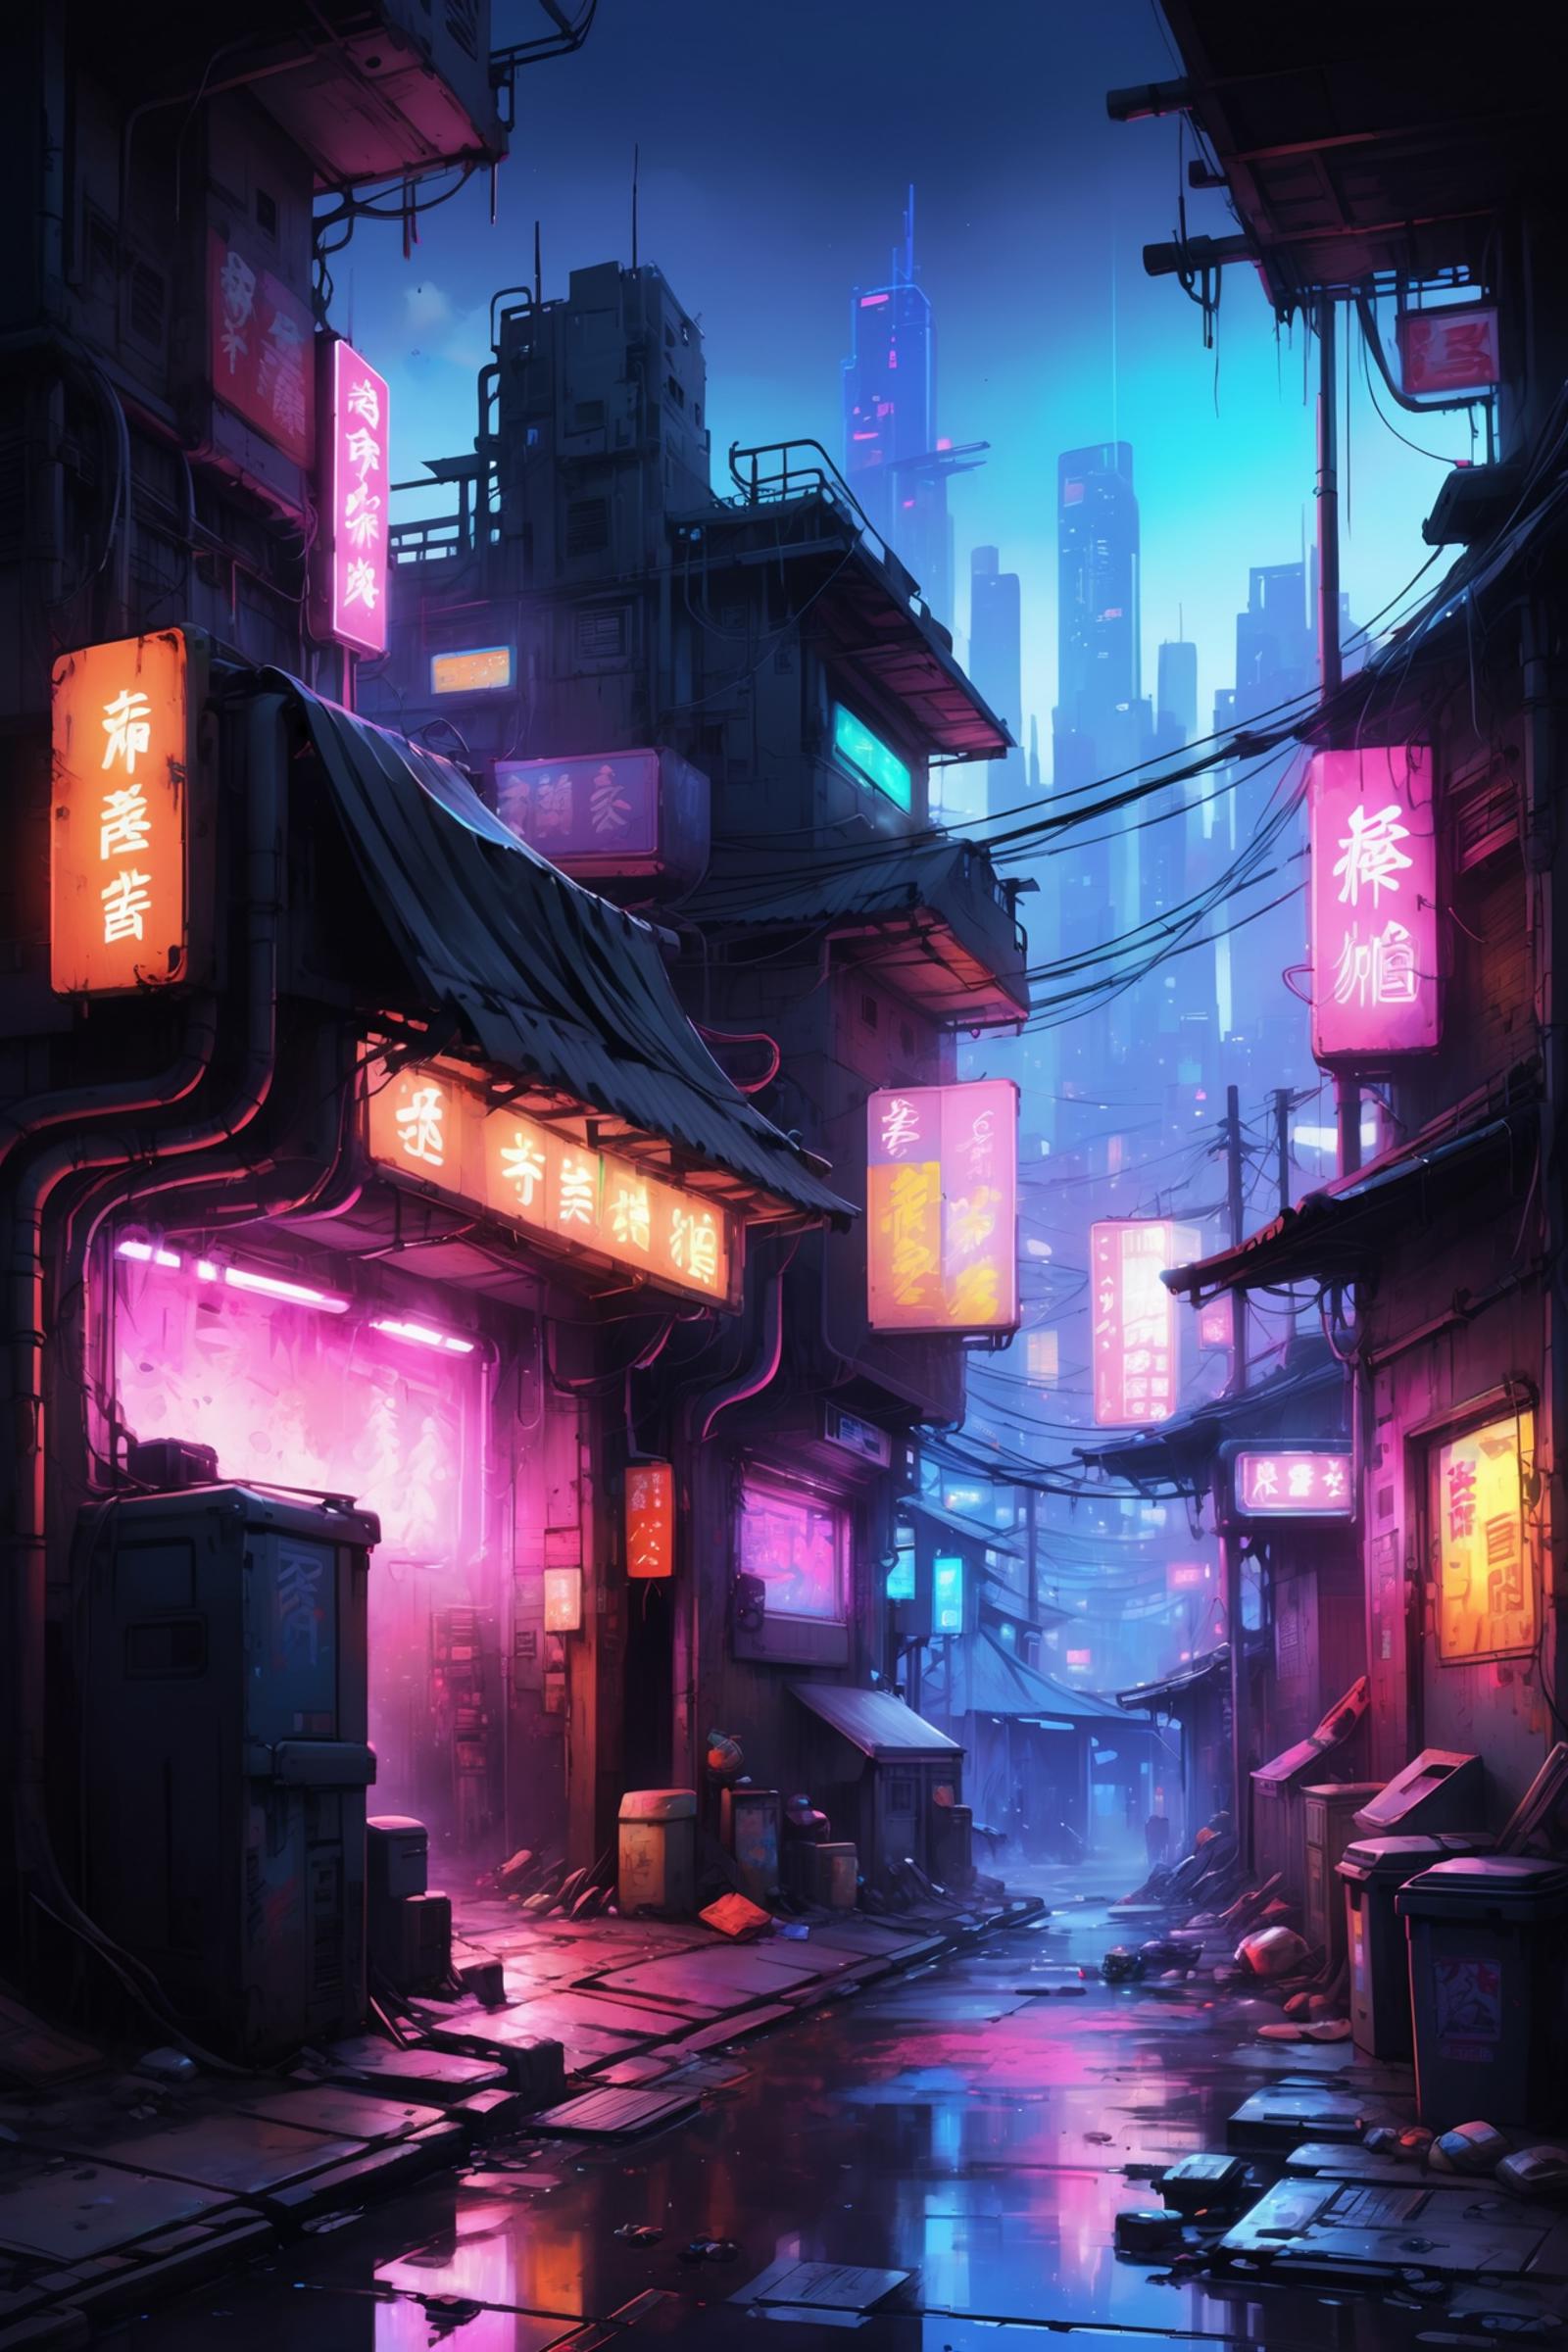 Anime-style cityscape with brightly colored neon signs and blue sky background.